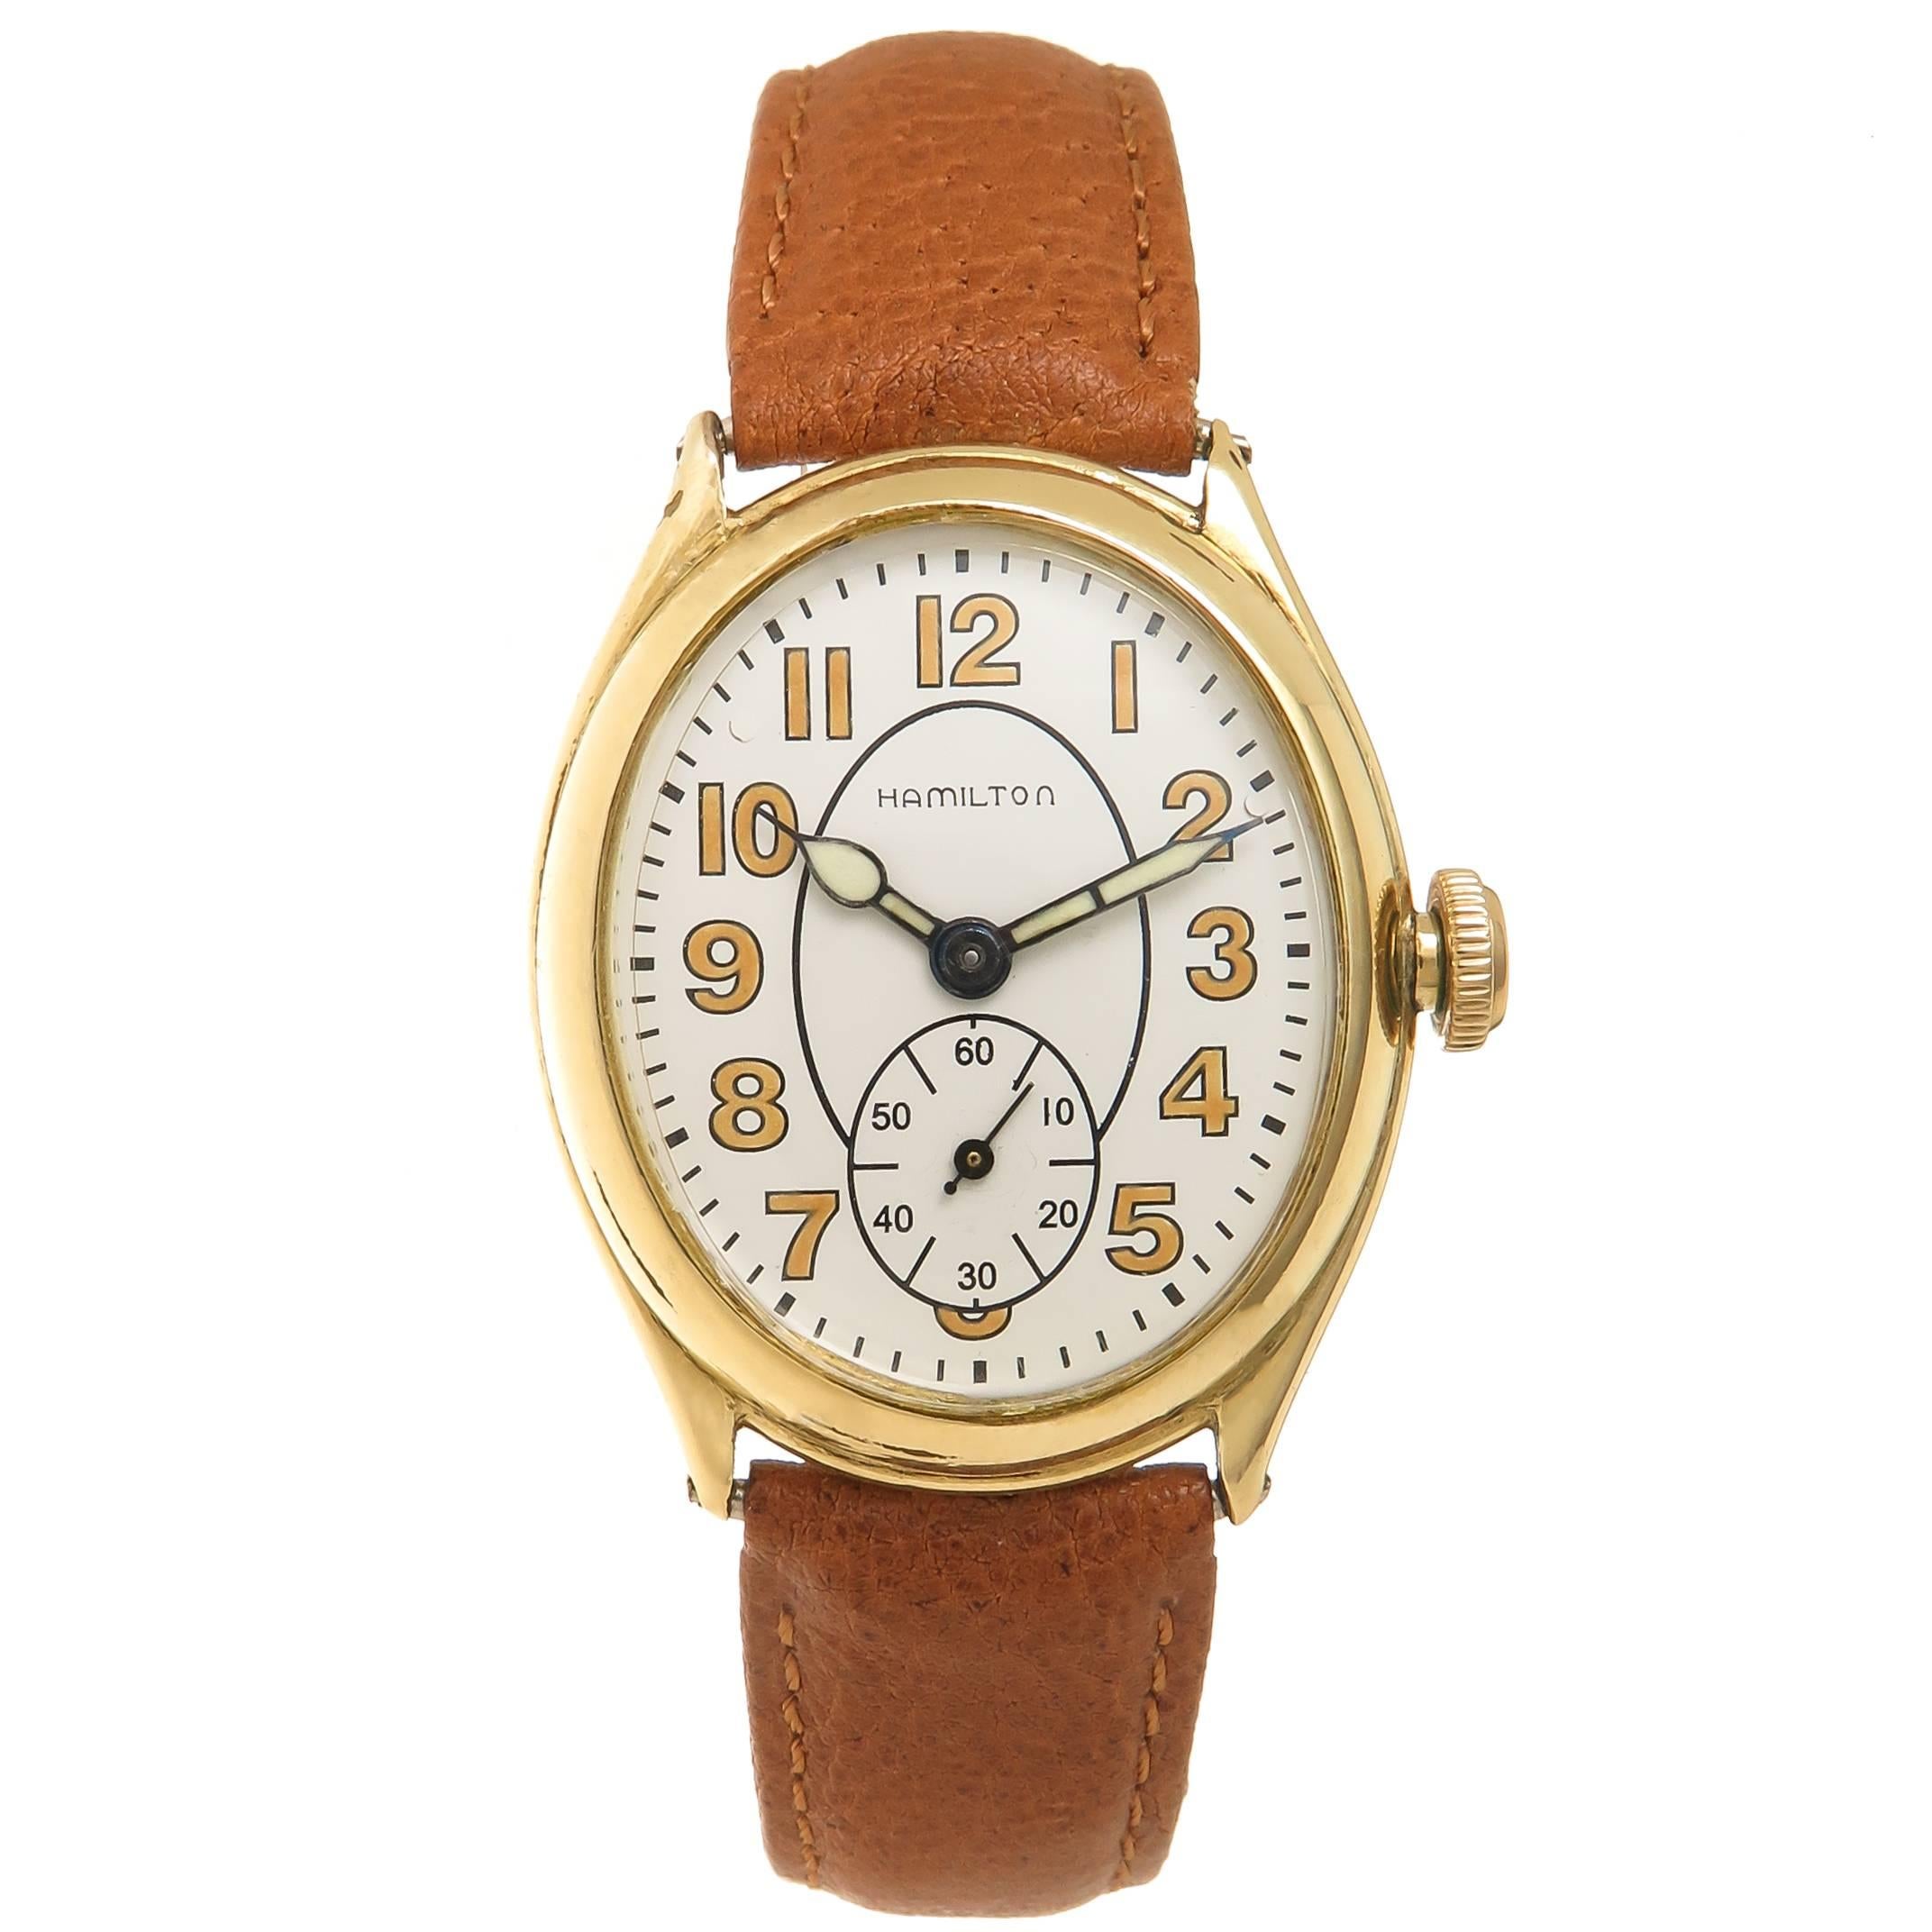 Hamilton Gold Filled Oval Wristwatch